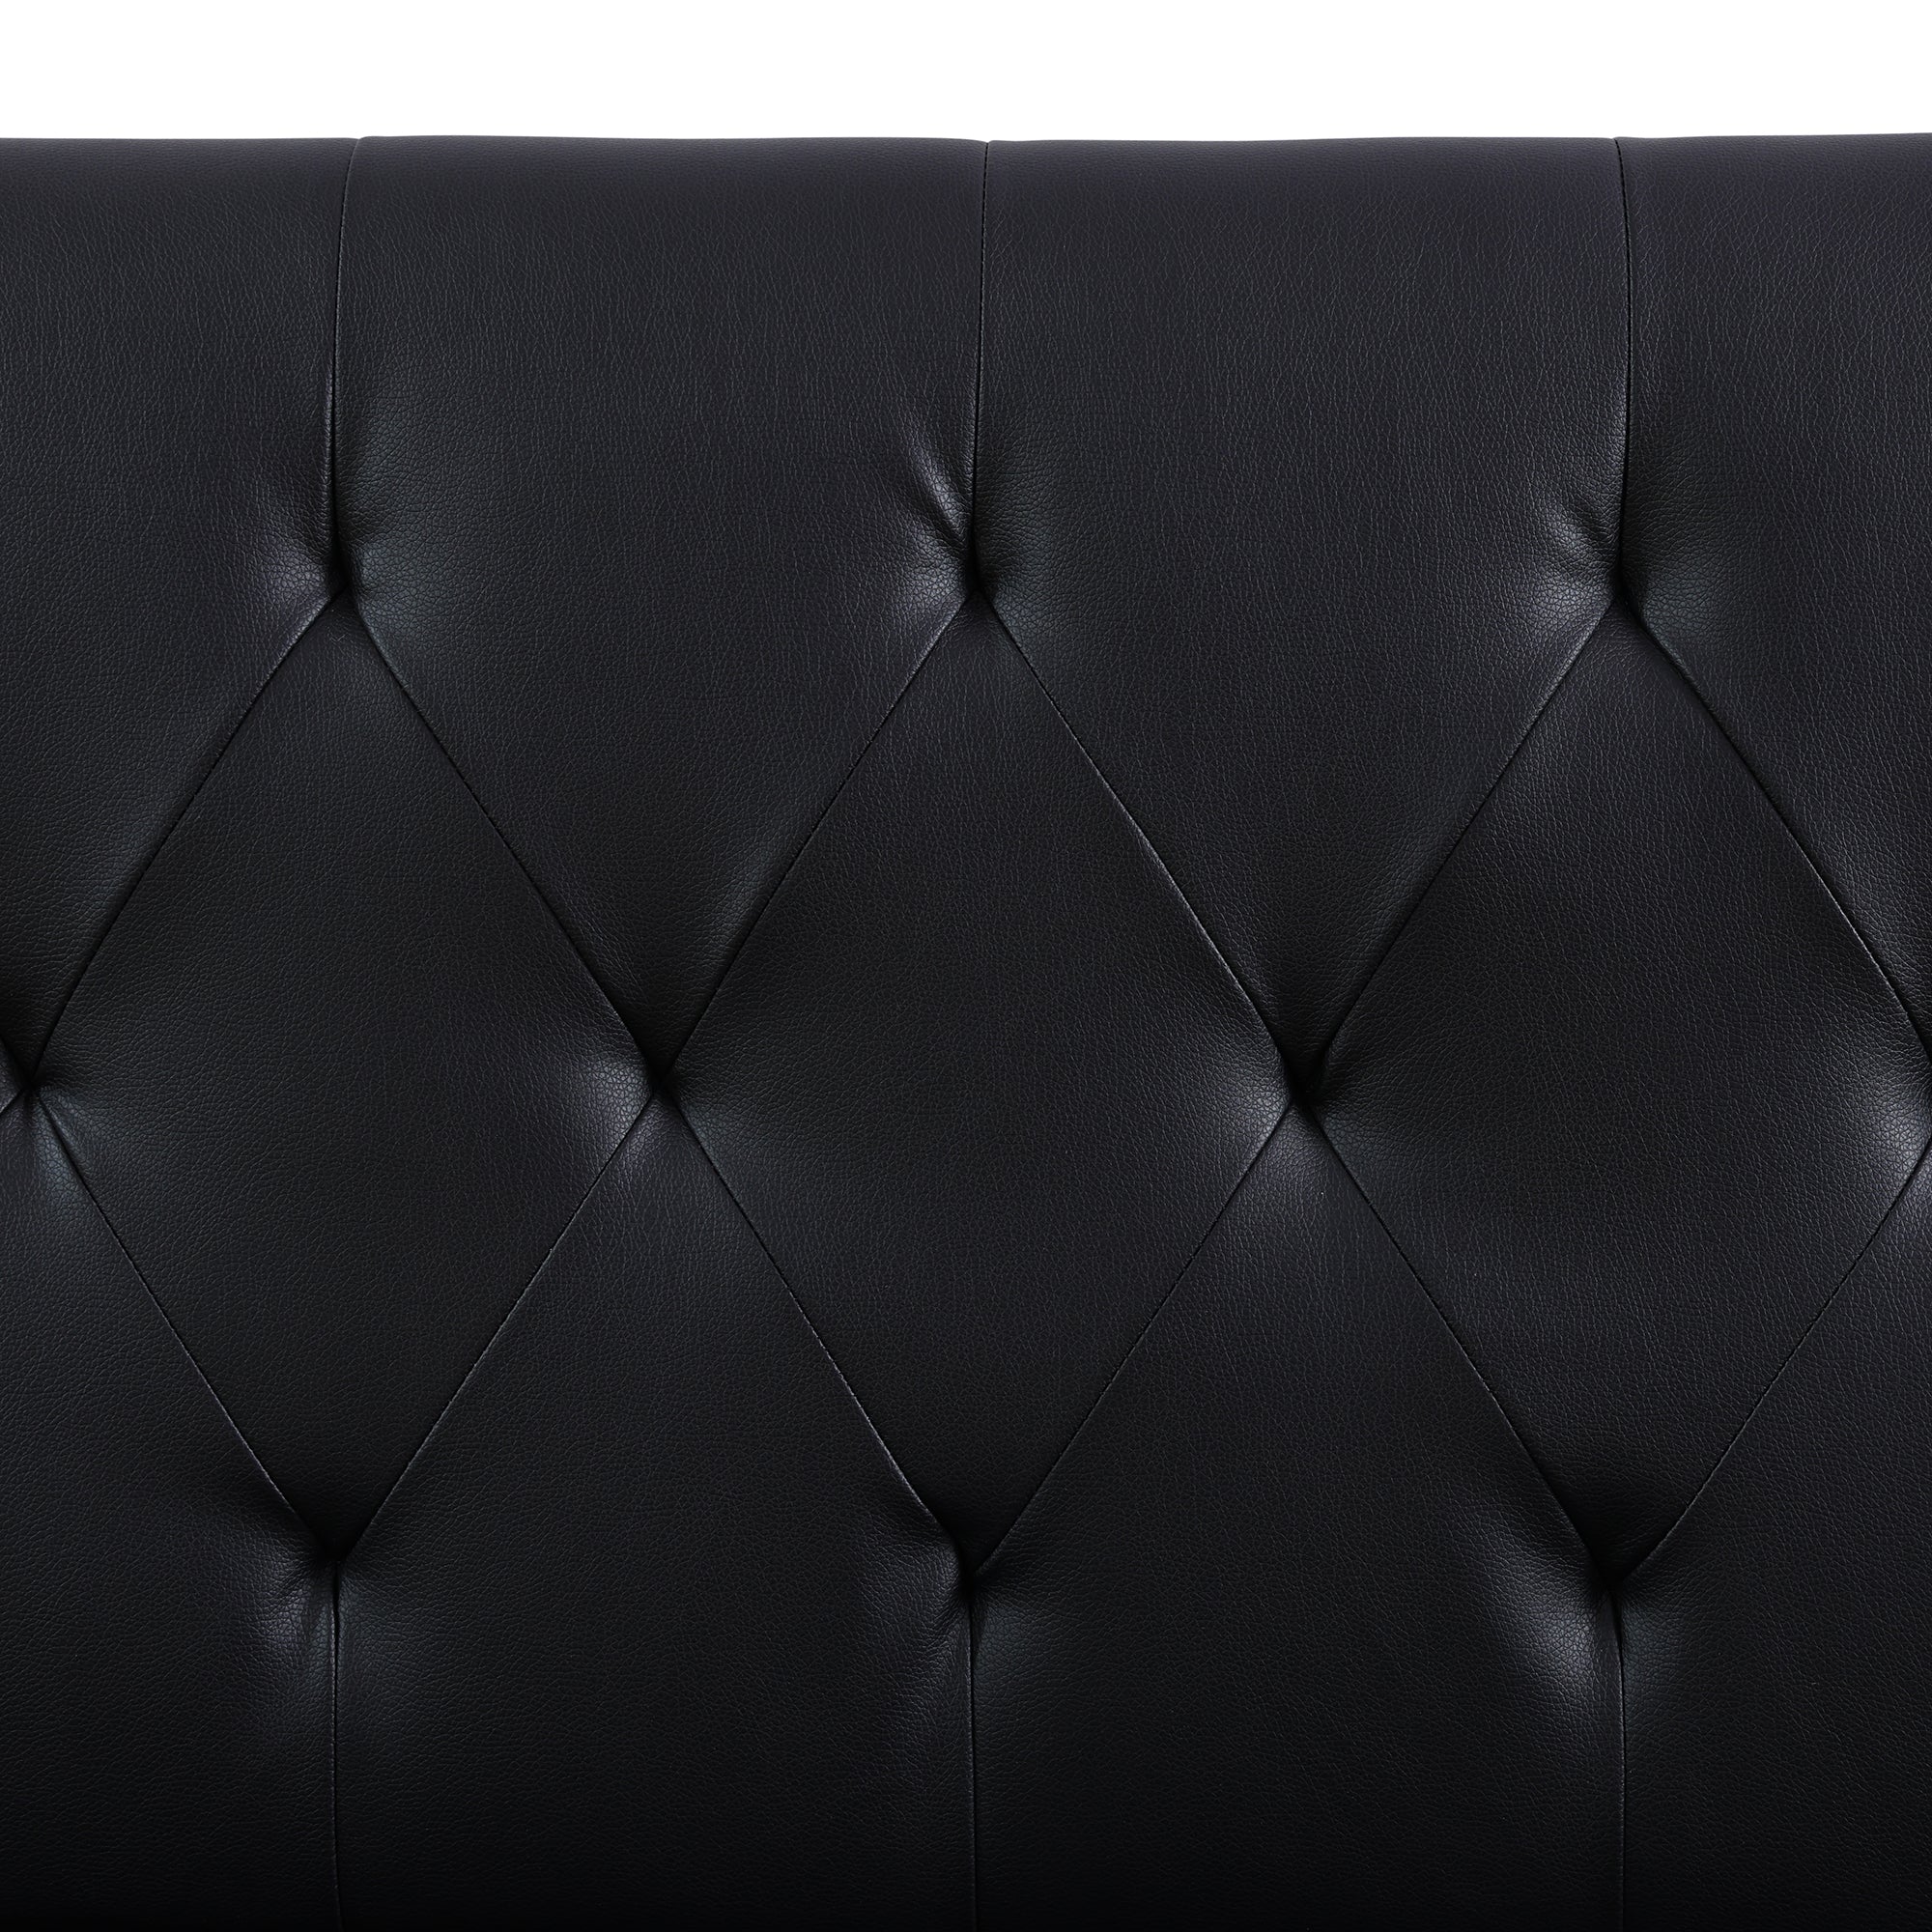 Ainehome Black Faux Leather Sofa bed